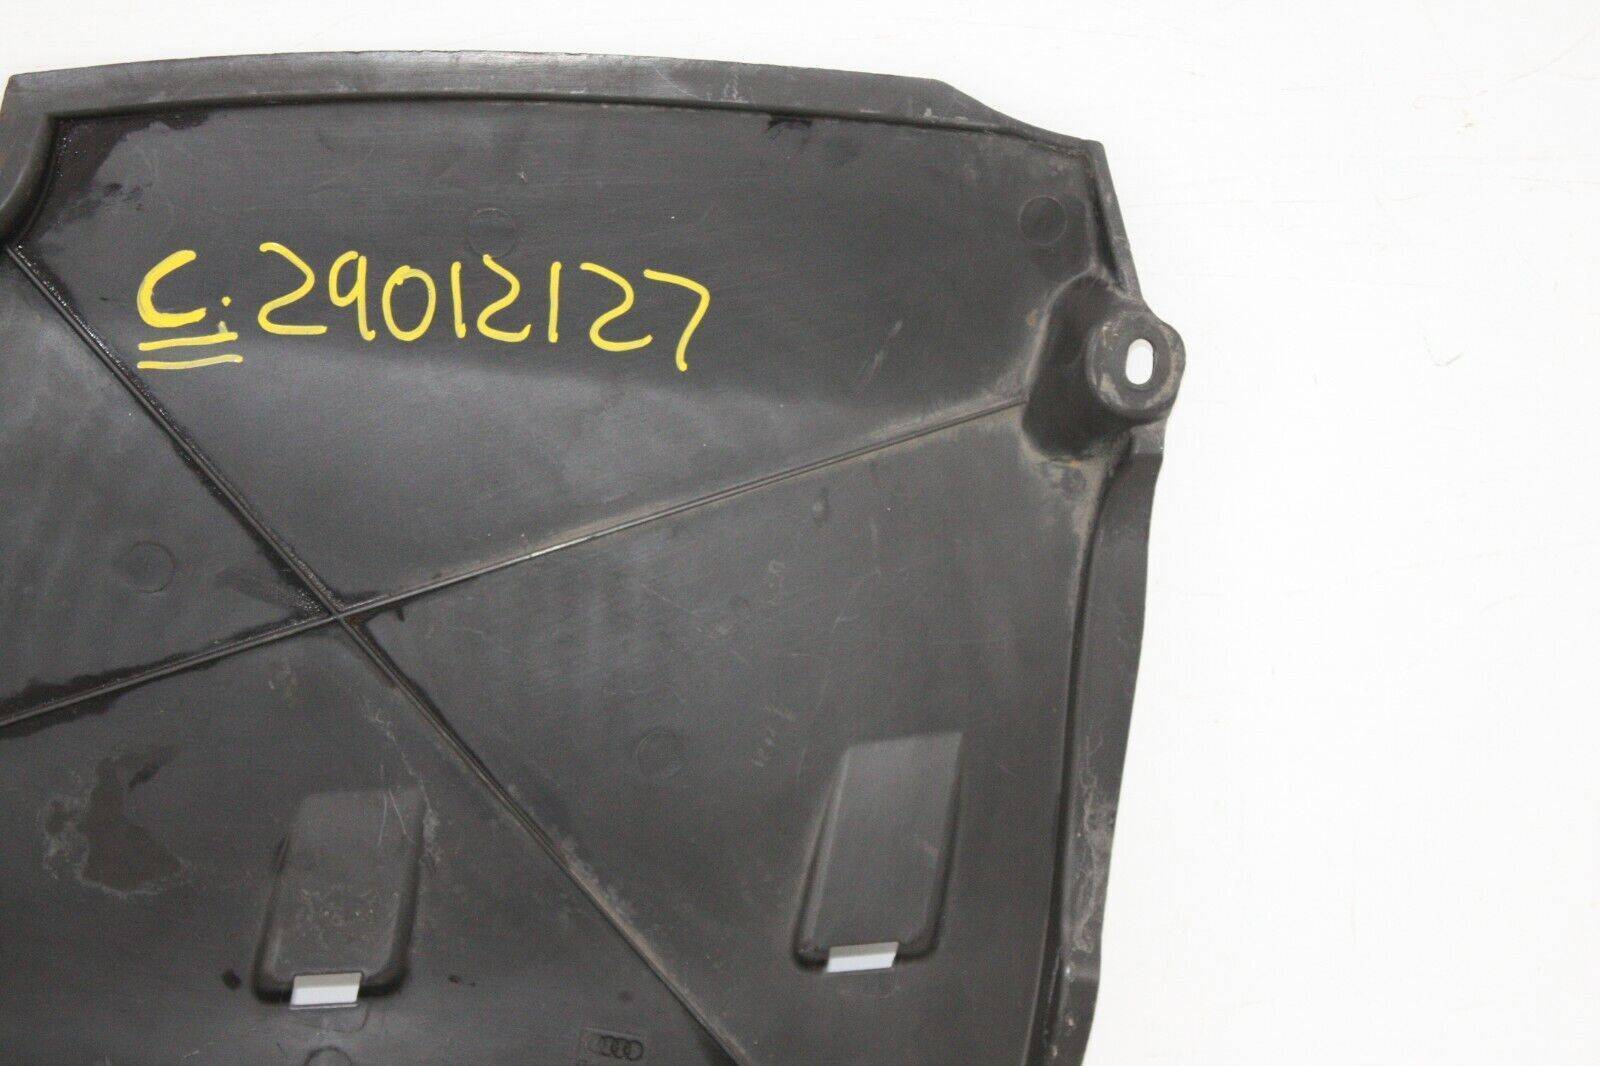 Audi-A4-Rear-Right-Underbody-Tray-Cover-2015-TO-2018-8W0825219A-175367535392-8